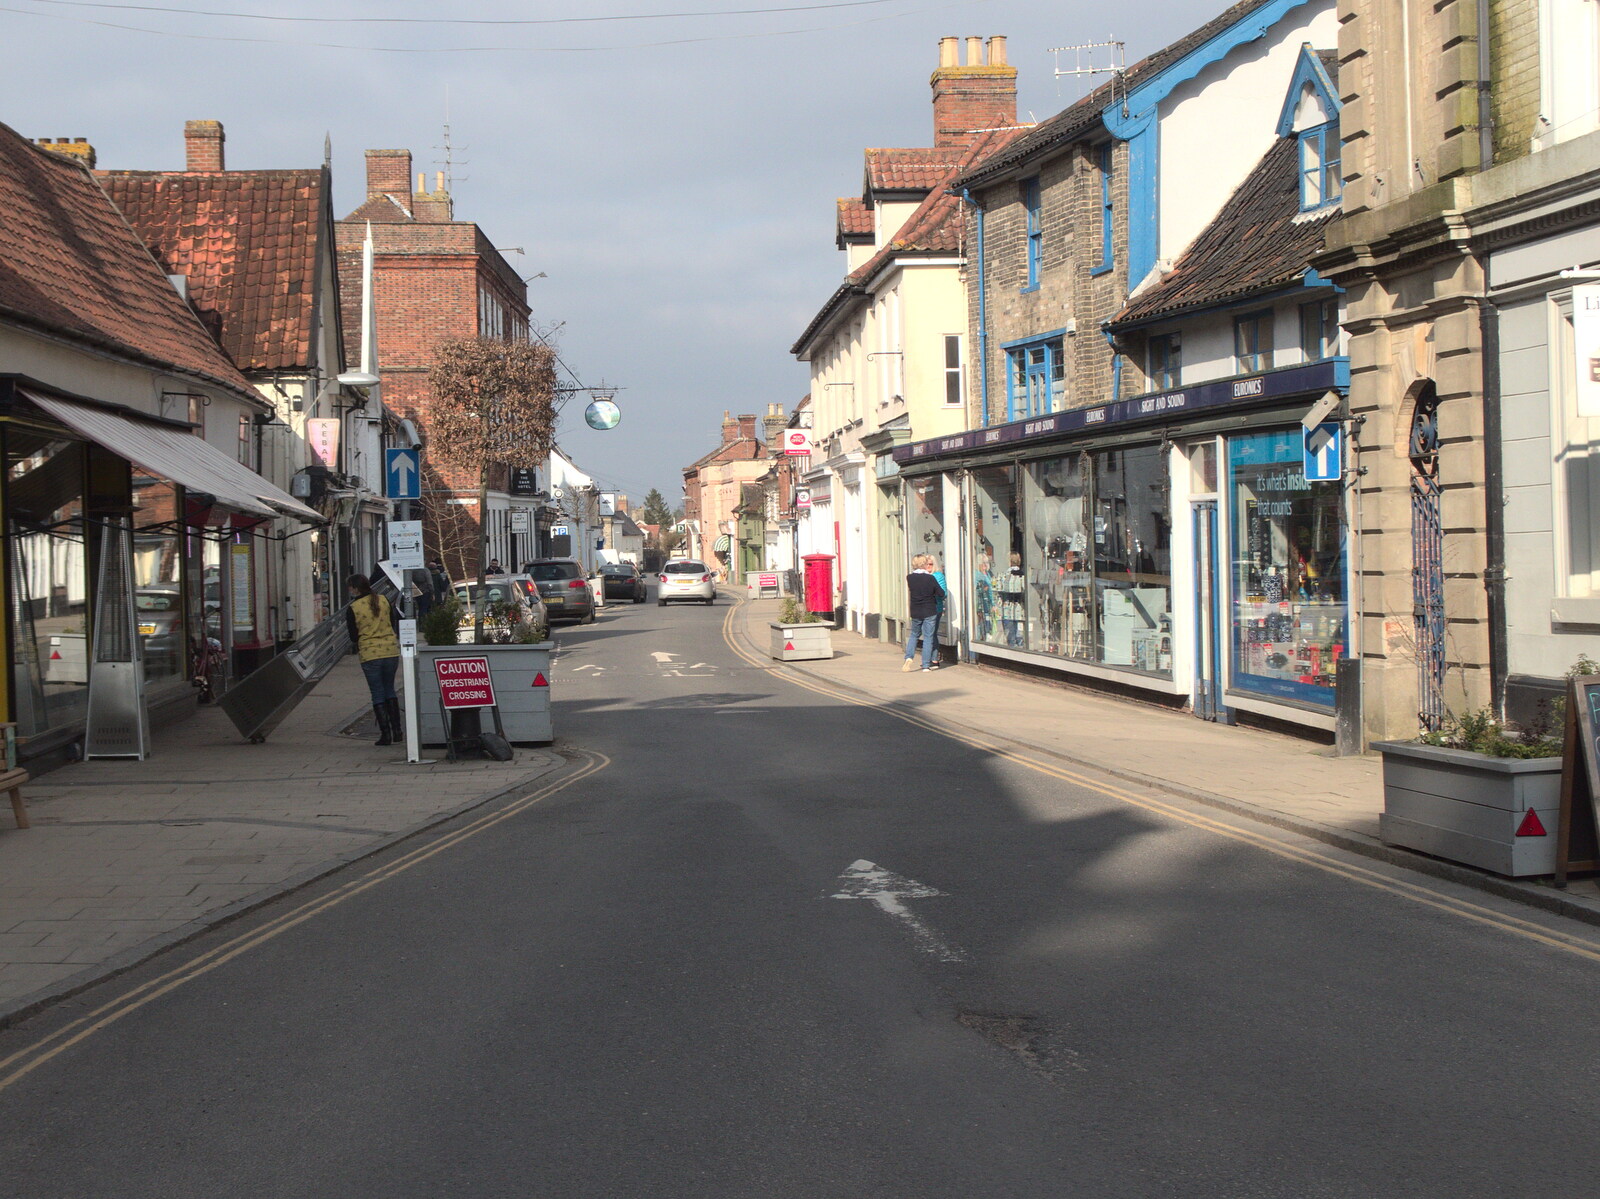 The Thoroughfare from A Vaccine Postcard from Harleston, Norfolk - 22nd March 2021